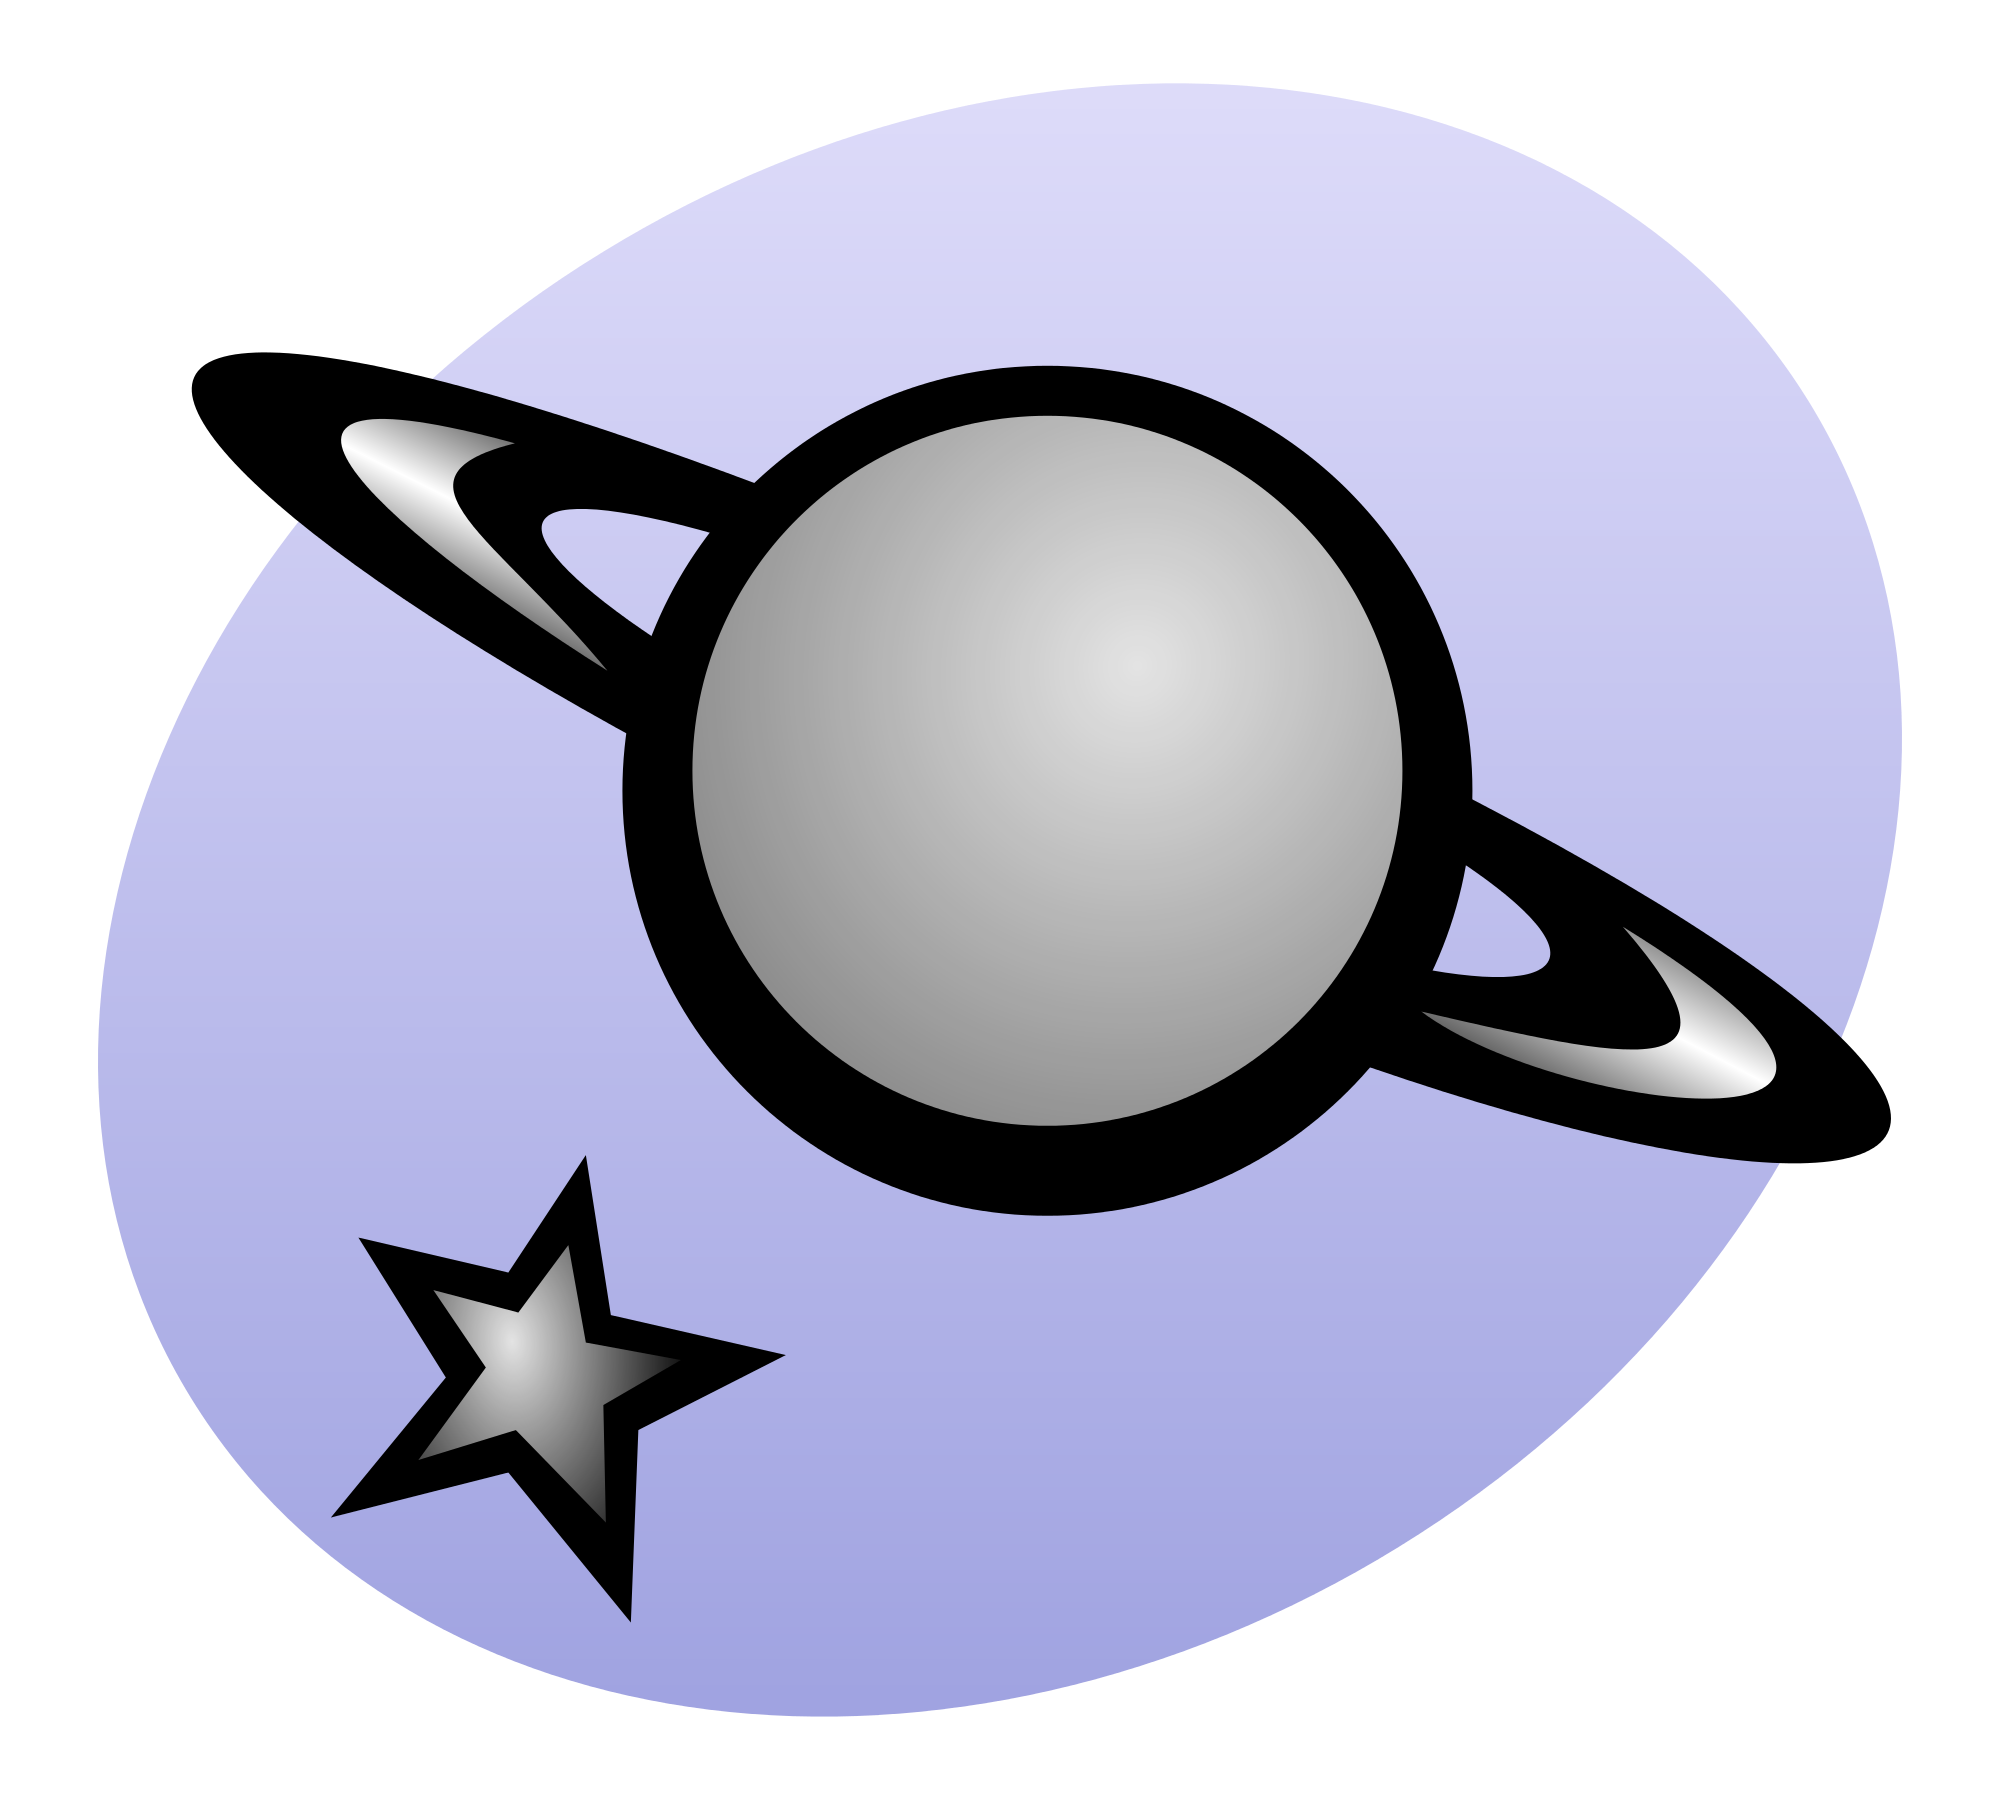 Space svg #17, Download drawings